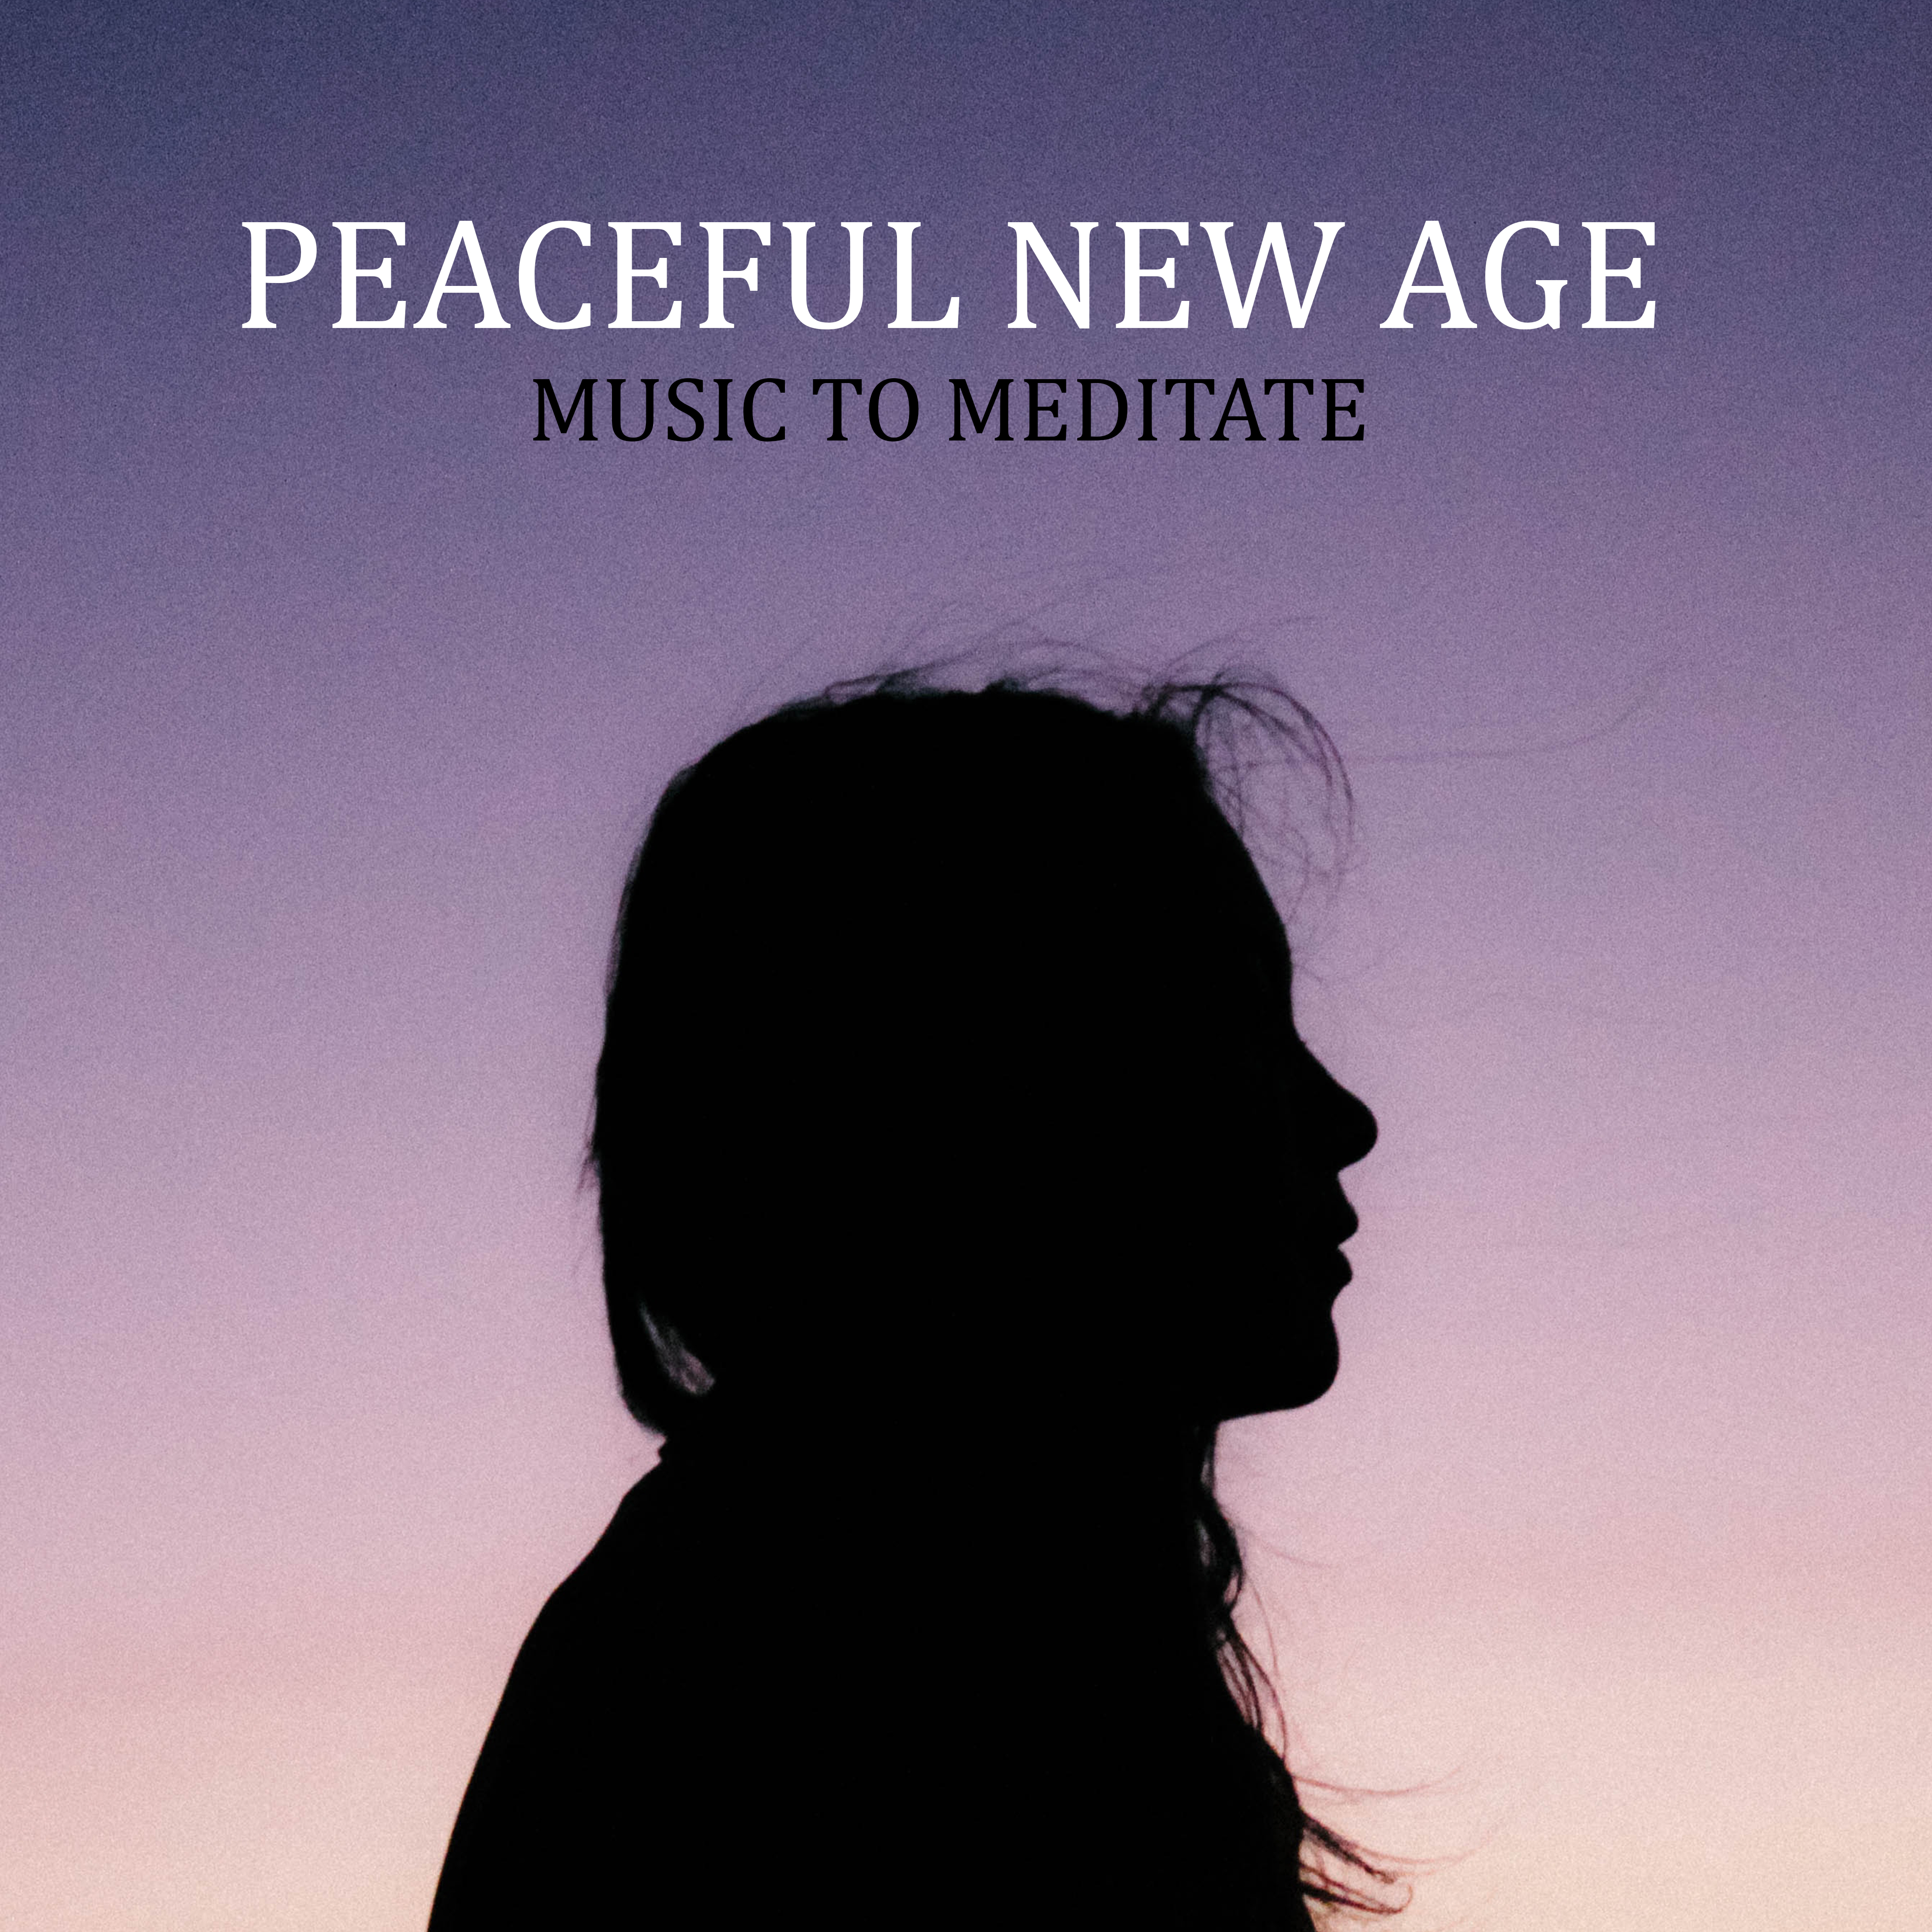 Peaceful New Age Music to Meditate